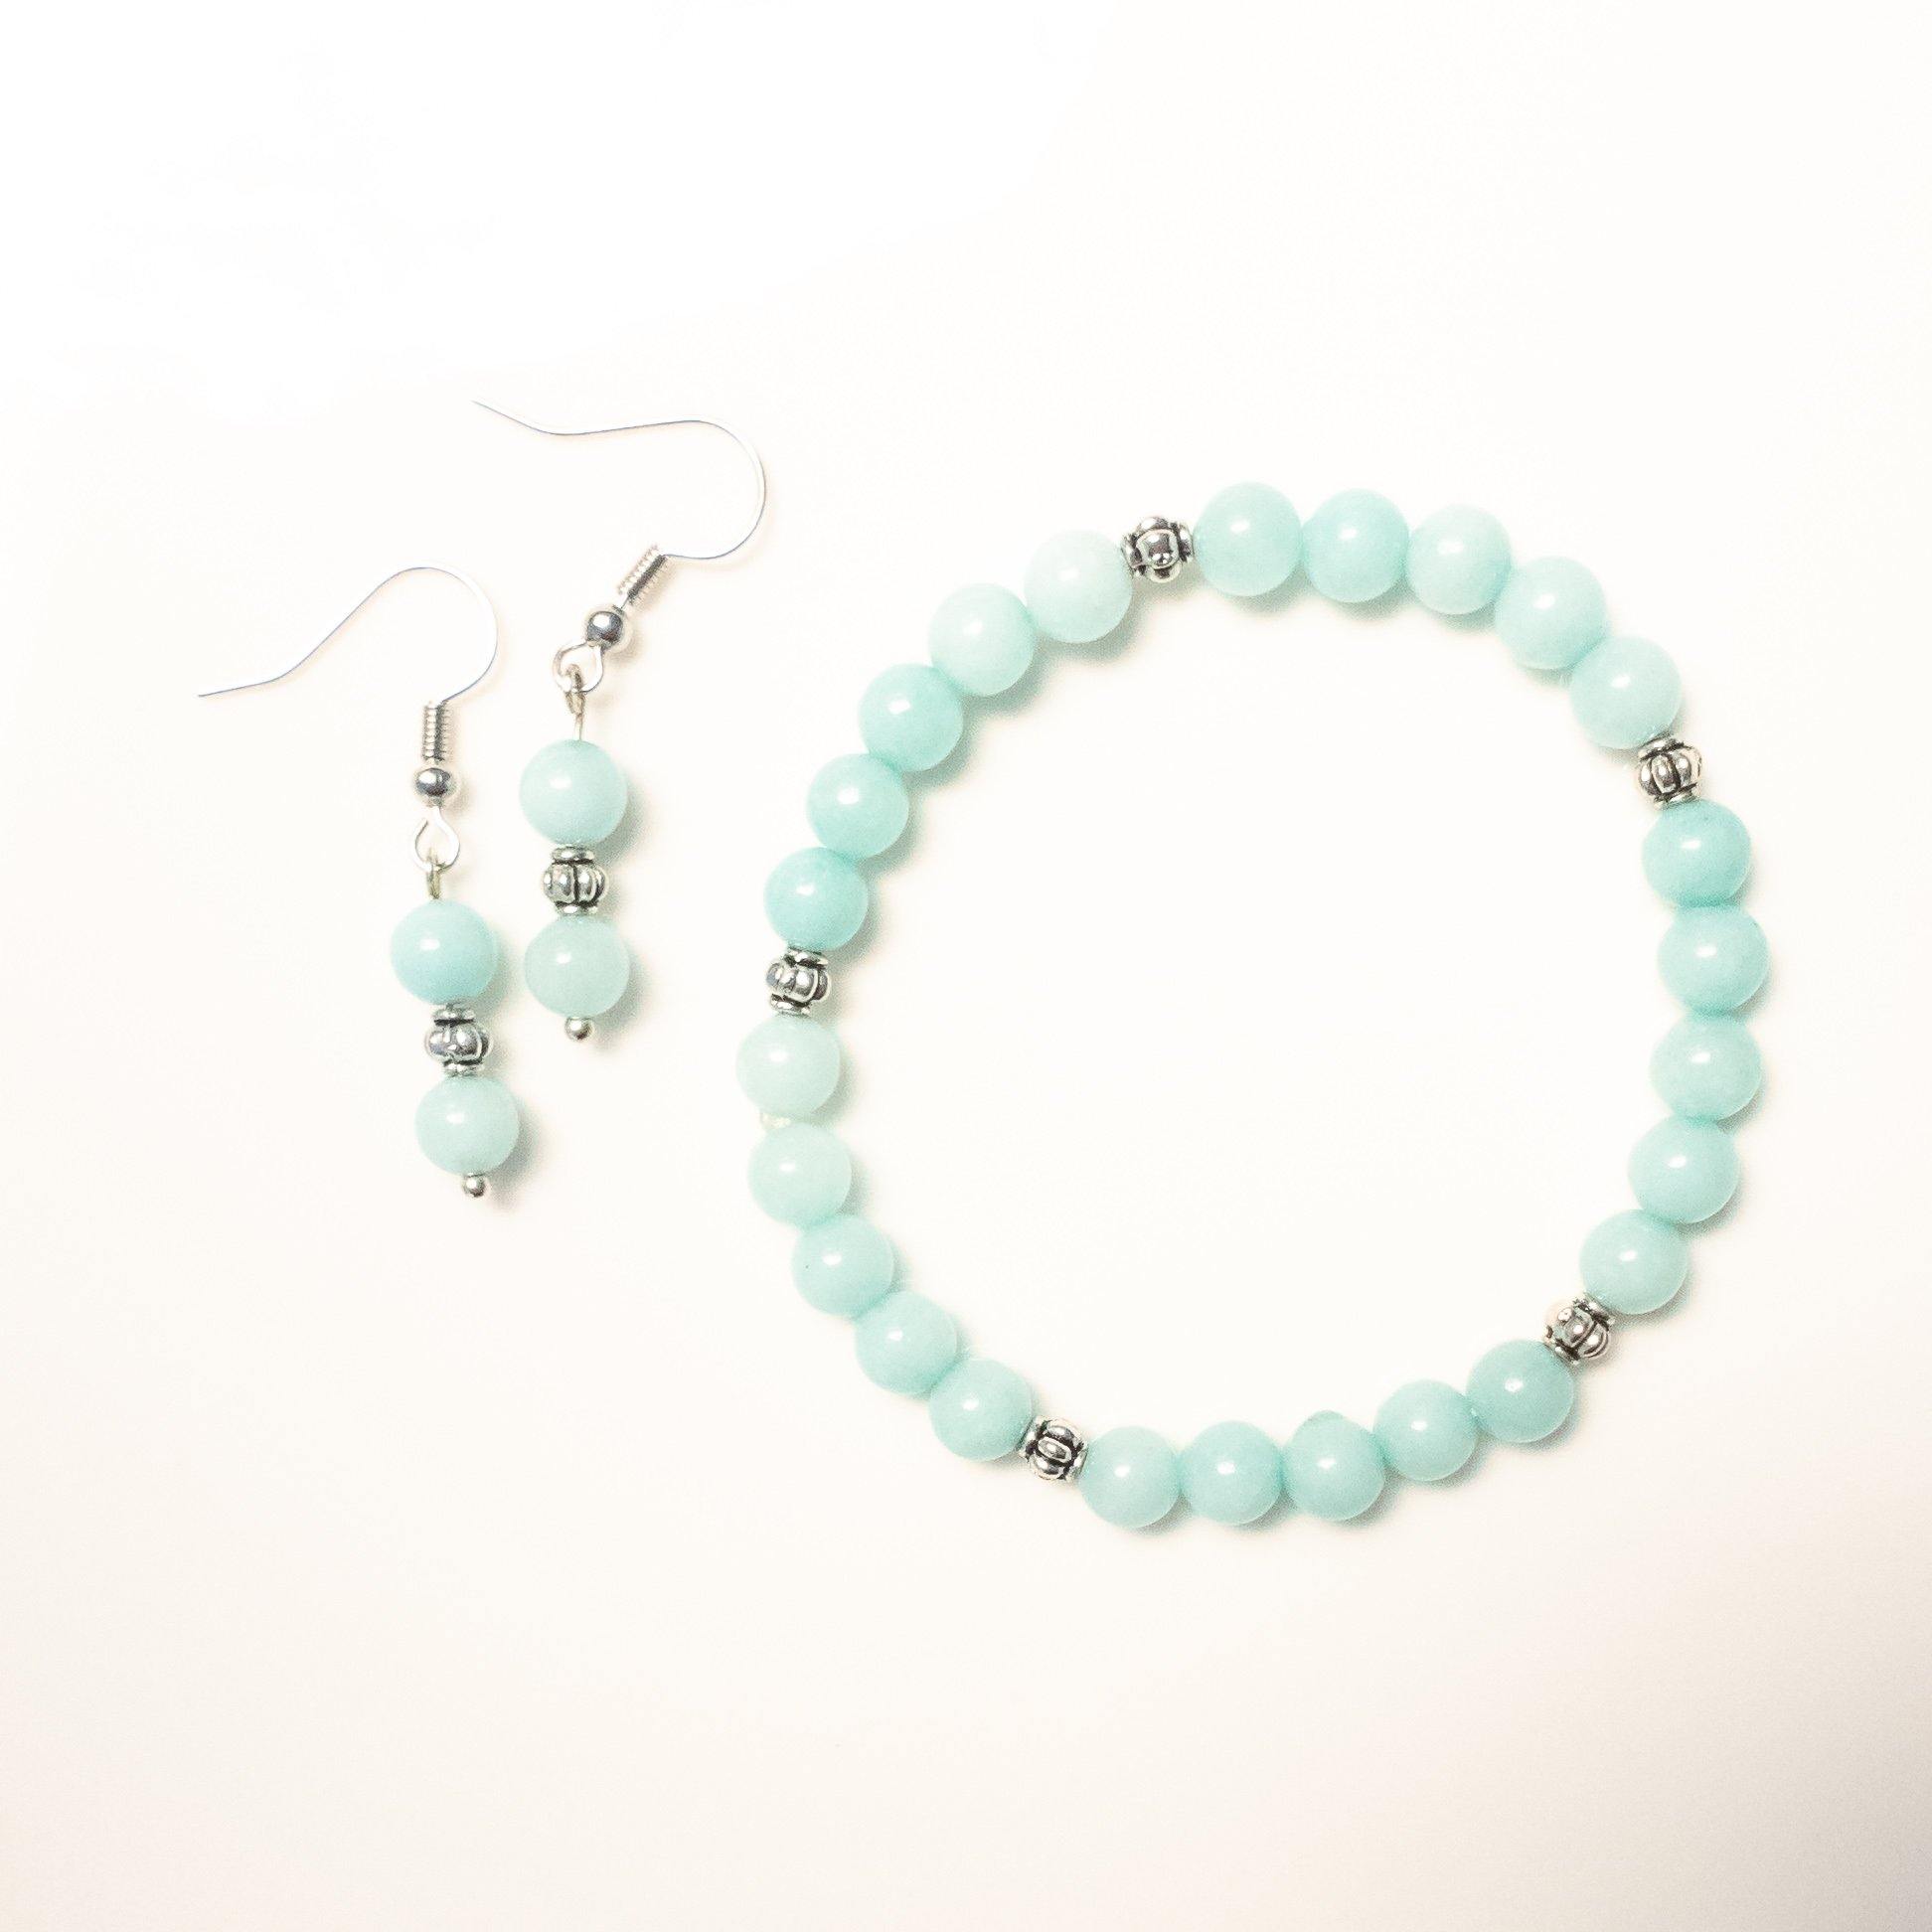 Beautiful Blue Amazonite Bracelet and Matching Earrings with Alloy Accents - Top View - BellaChel Jeweler